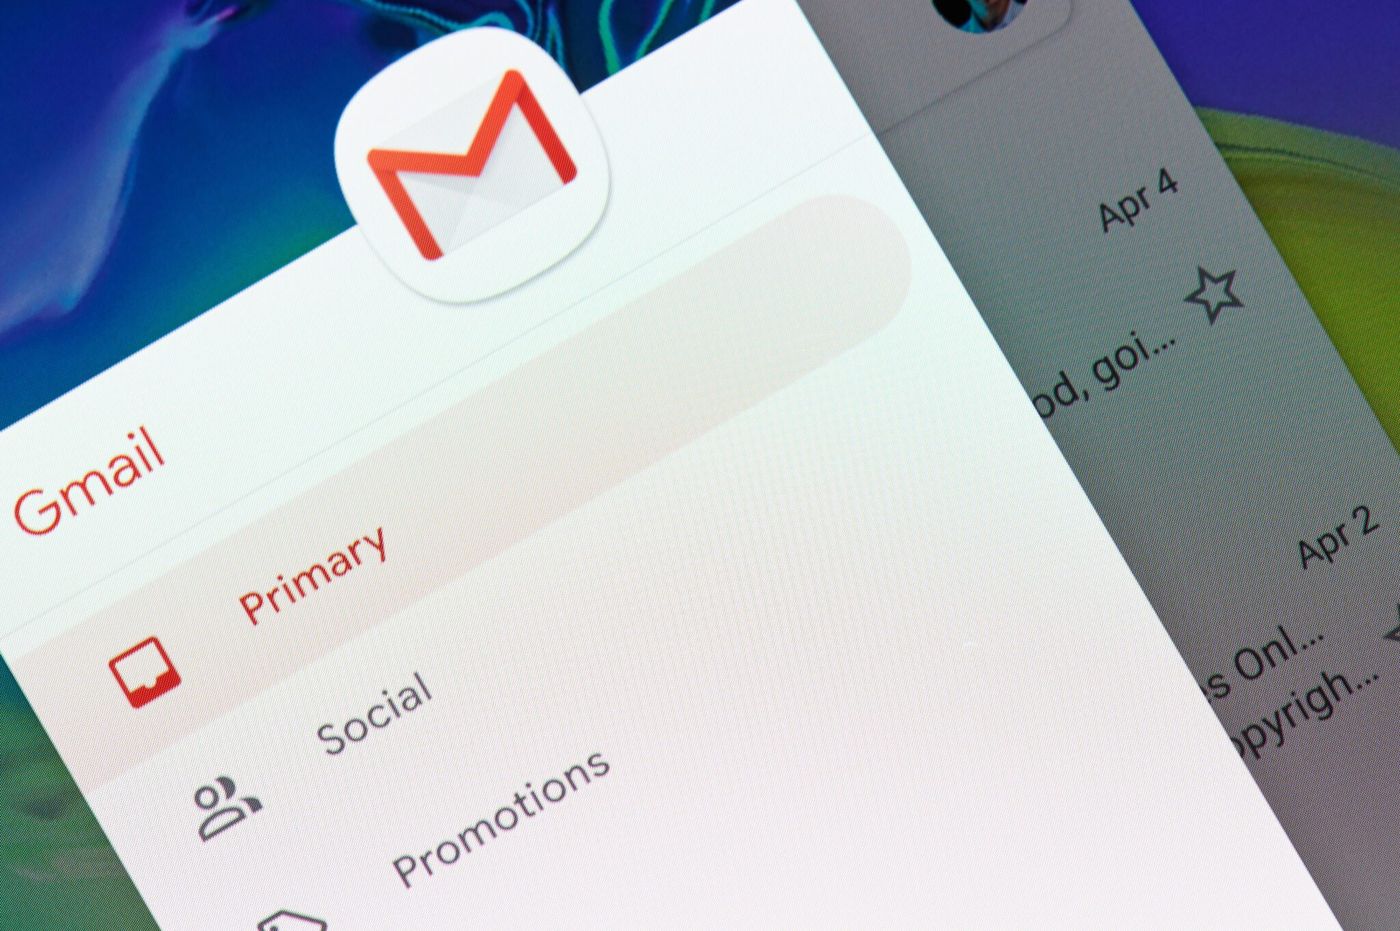 how-to-check-all-gmail-accounts-linked-to-my-phone-number